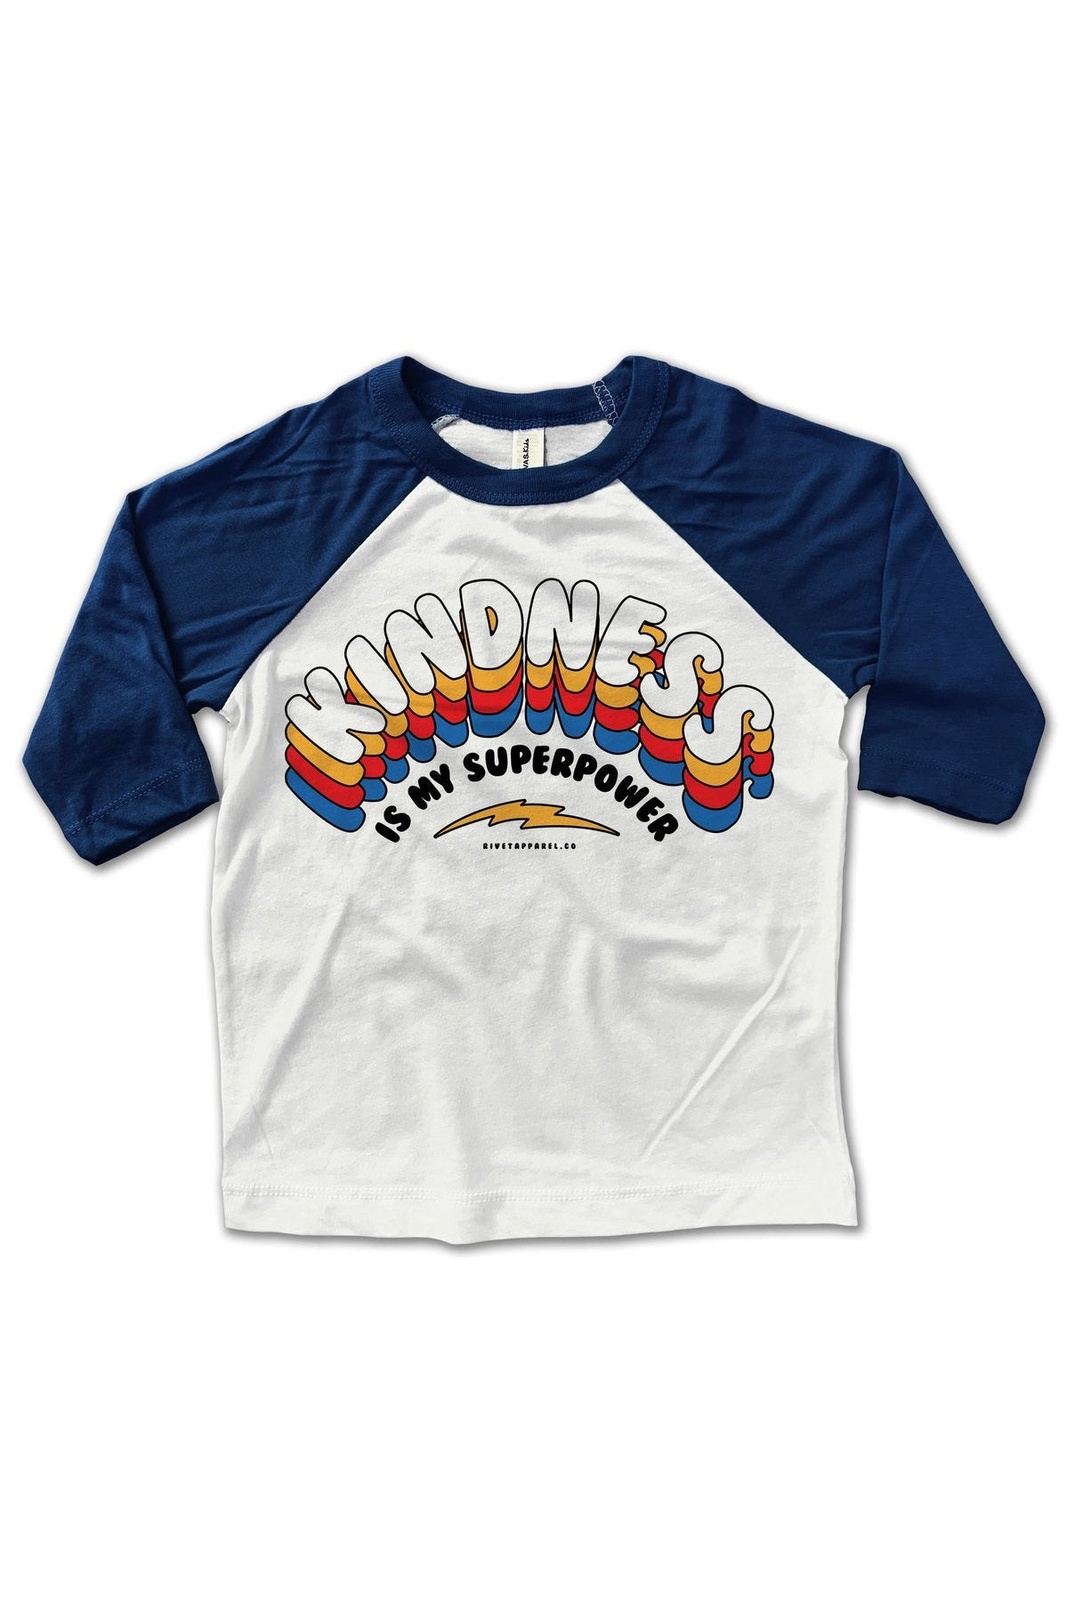 Kindness Is My Superpower Tee - Tea for Three: A Children's Boutique-New Arrivals-TheT43Shop